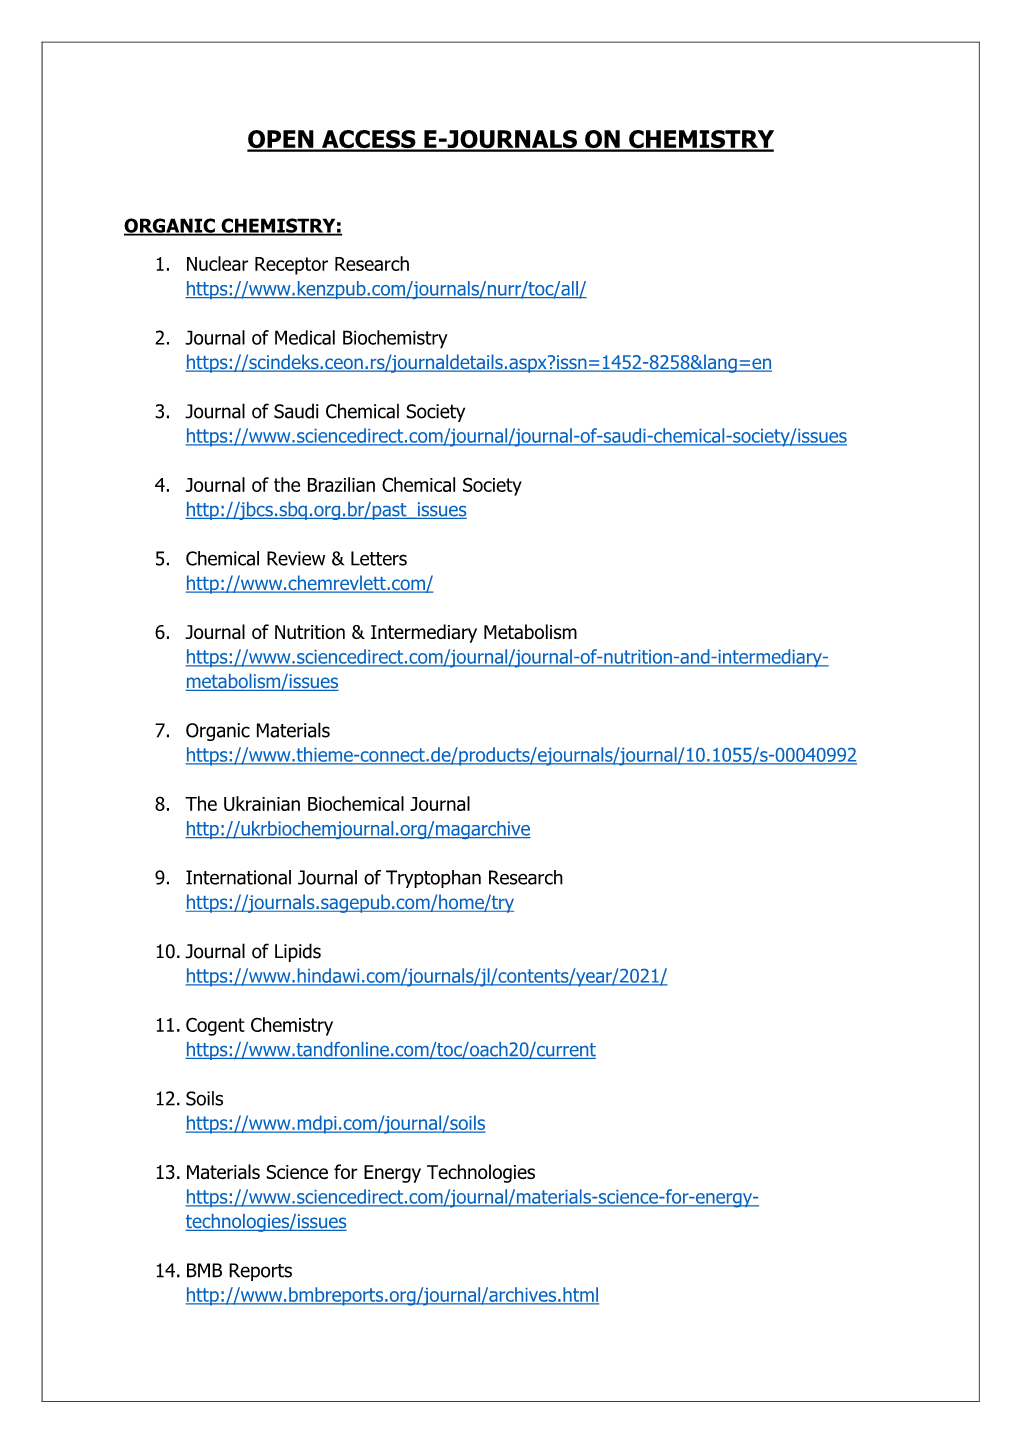 Open Access E-Journals on Chemistry